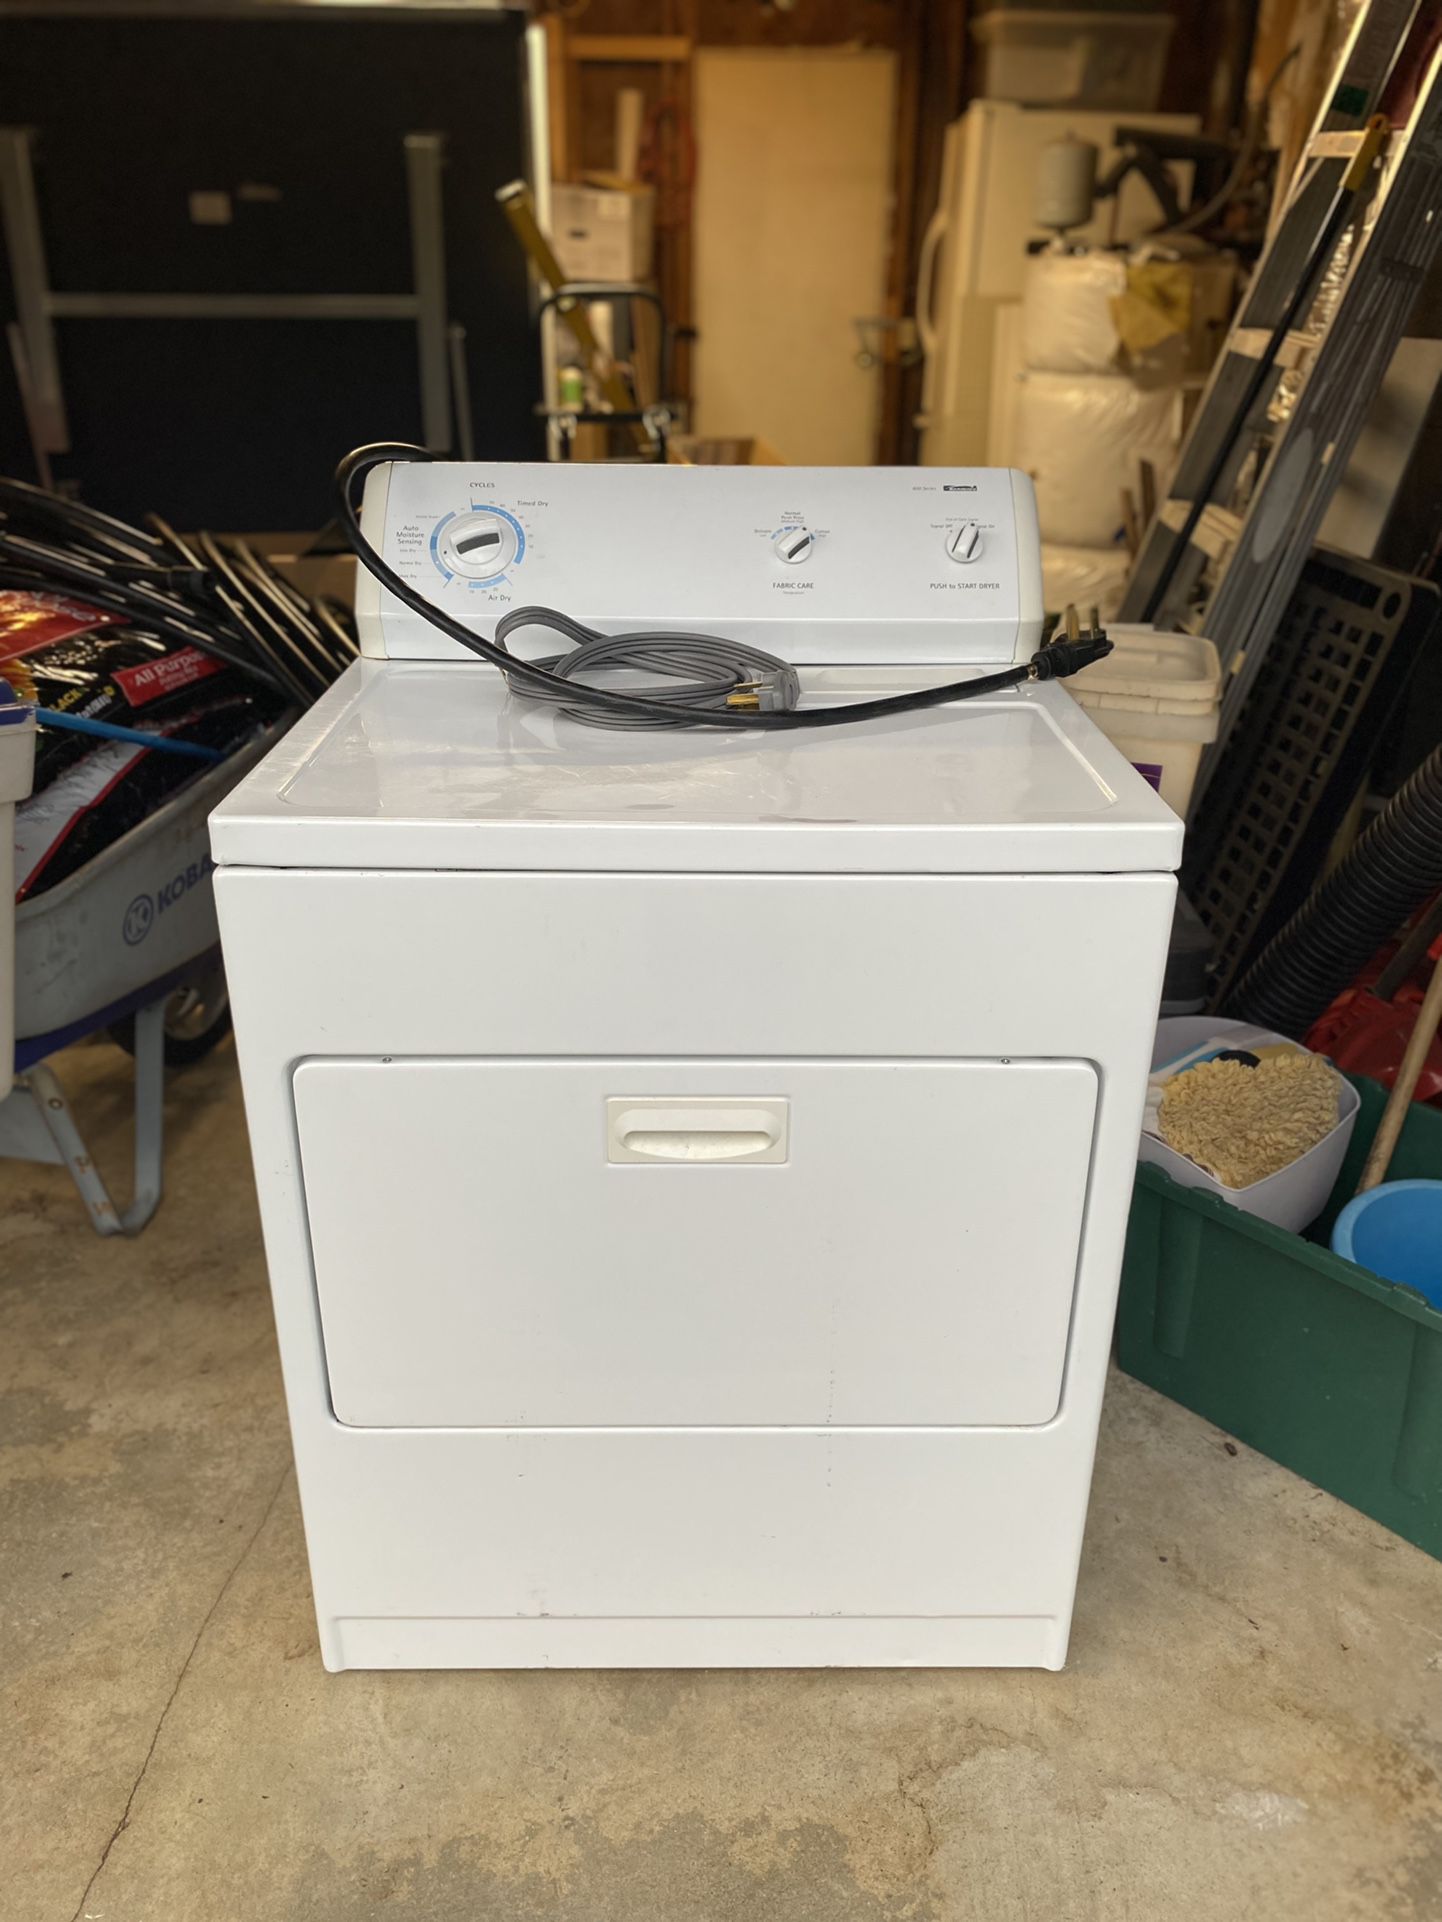 Make offer: Dryer: KENMORE with 3 & 4 Prong Plug In 🥳